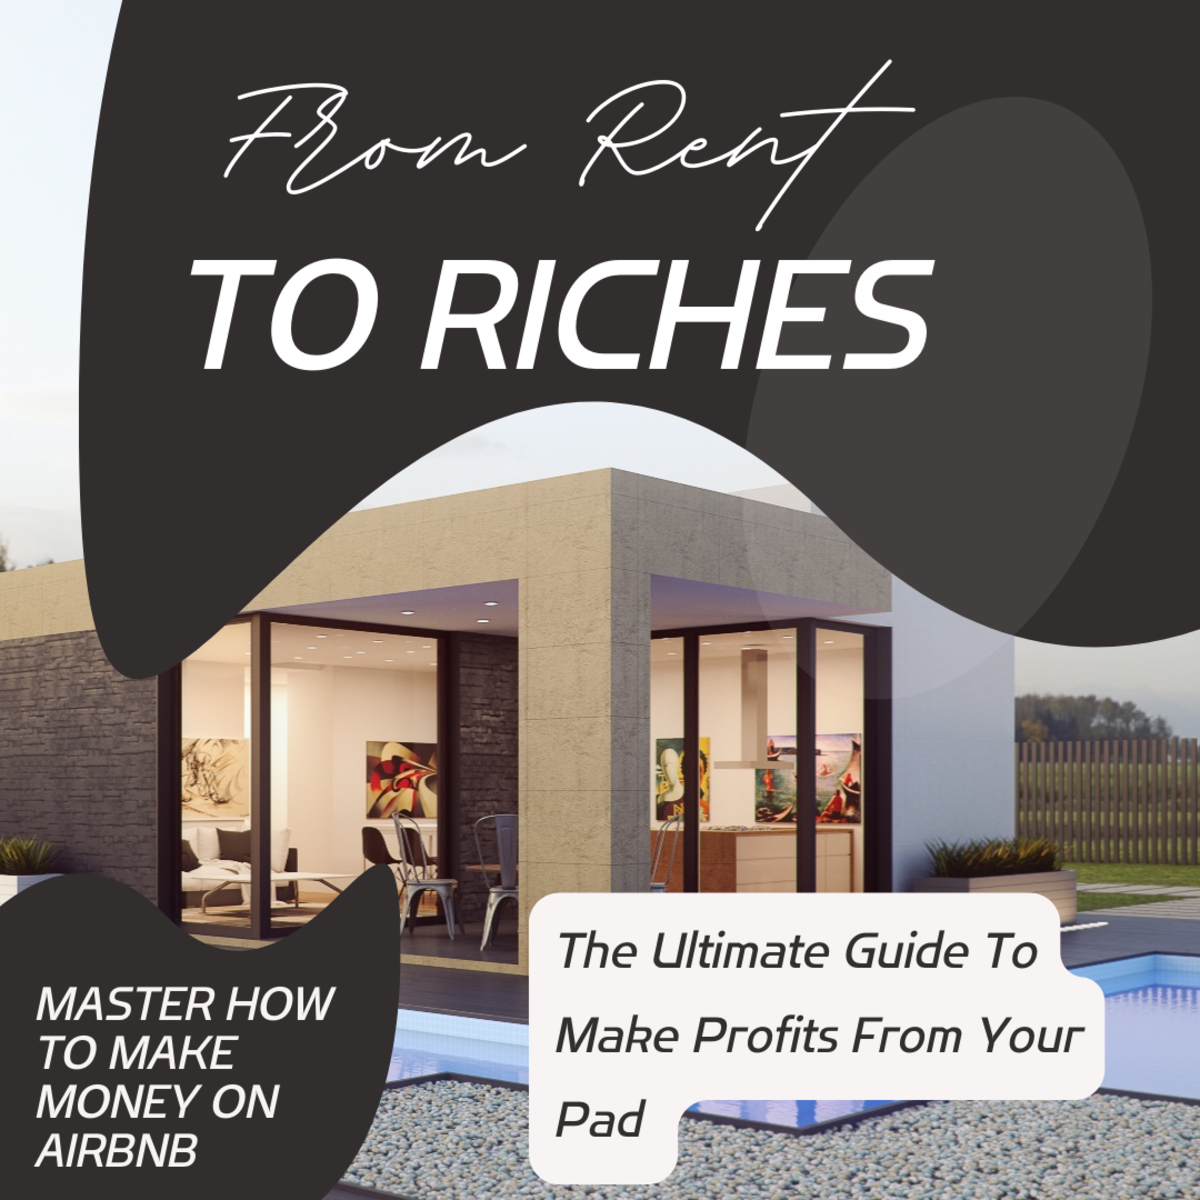 Making Money on Airbnb: Master the Basics and Turn Your Rent into Riches